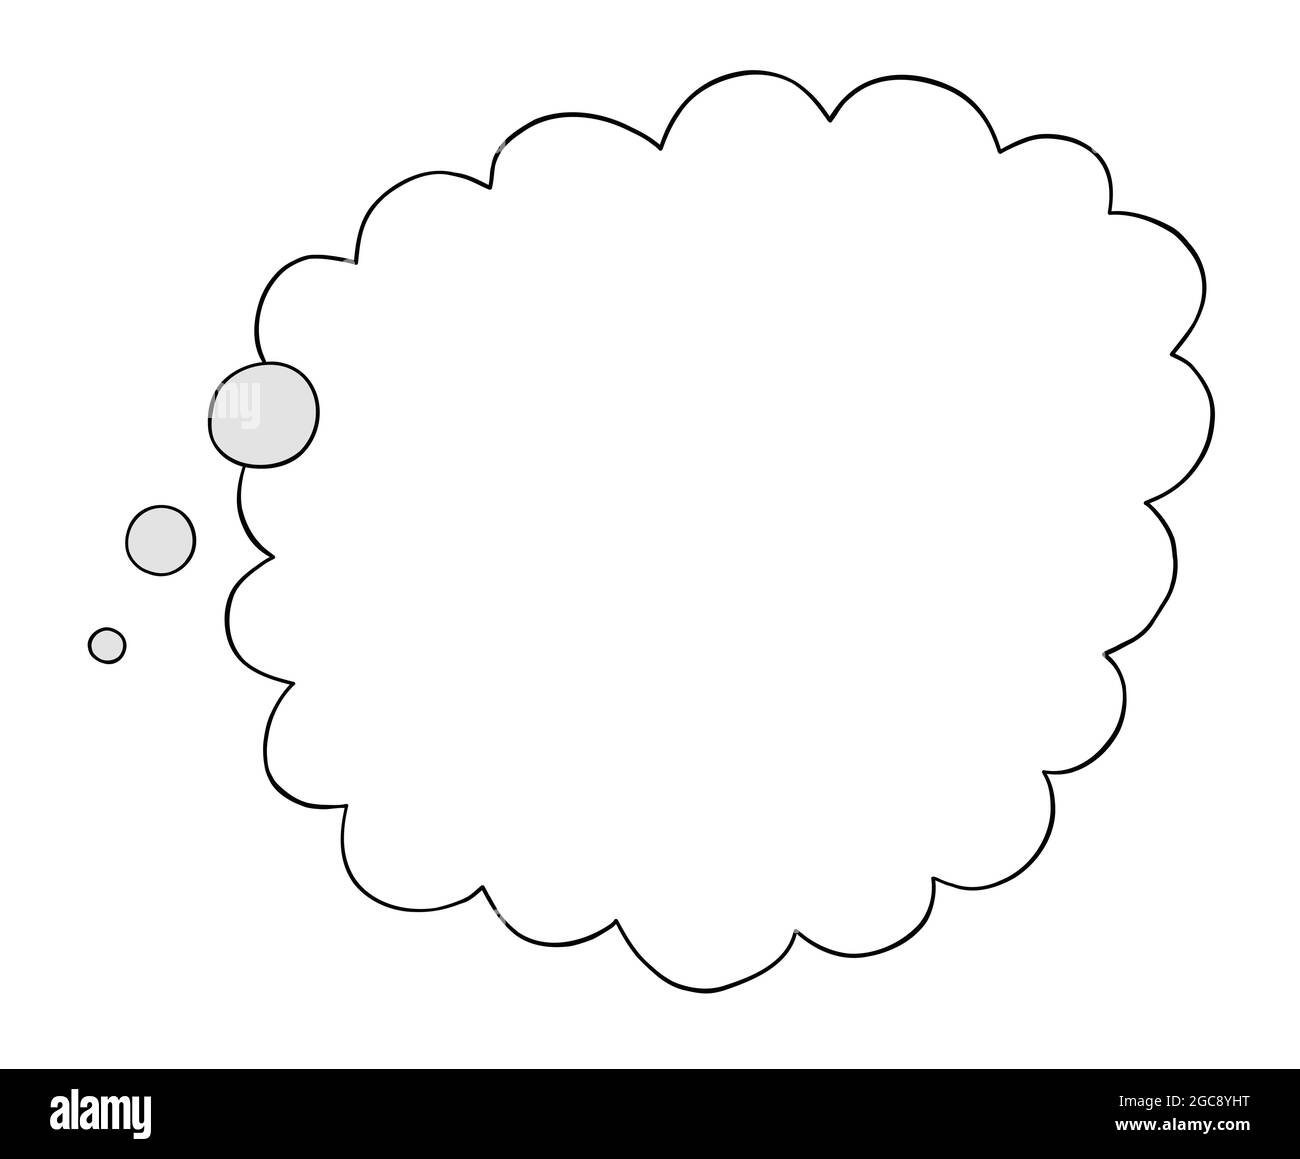 Cartoon blank thought bubble, vector illustration. Colored and black outlines. Stock Vector